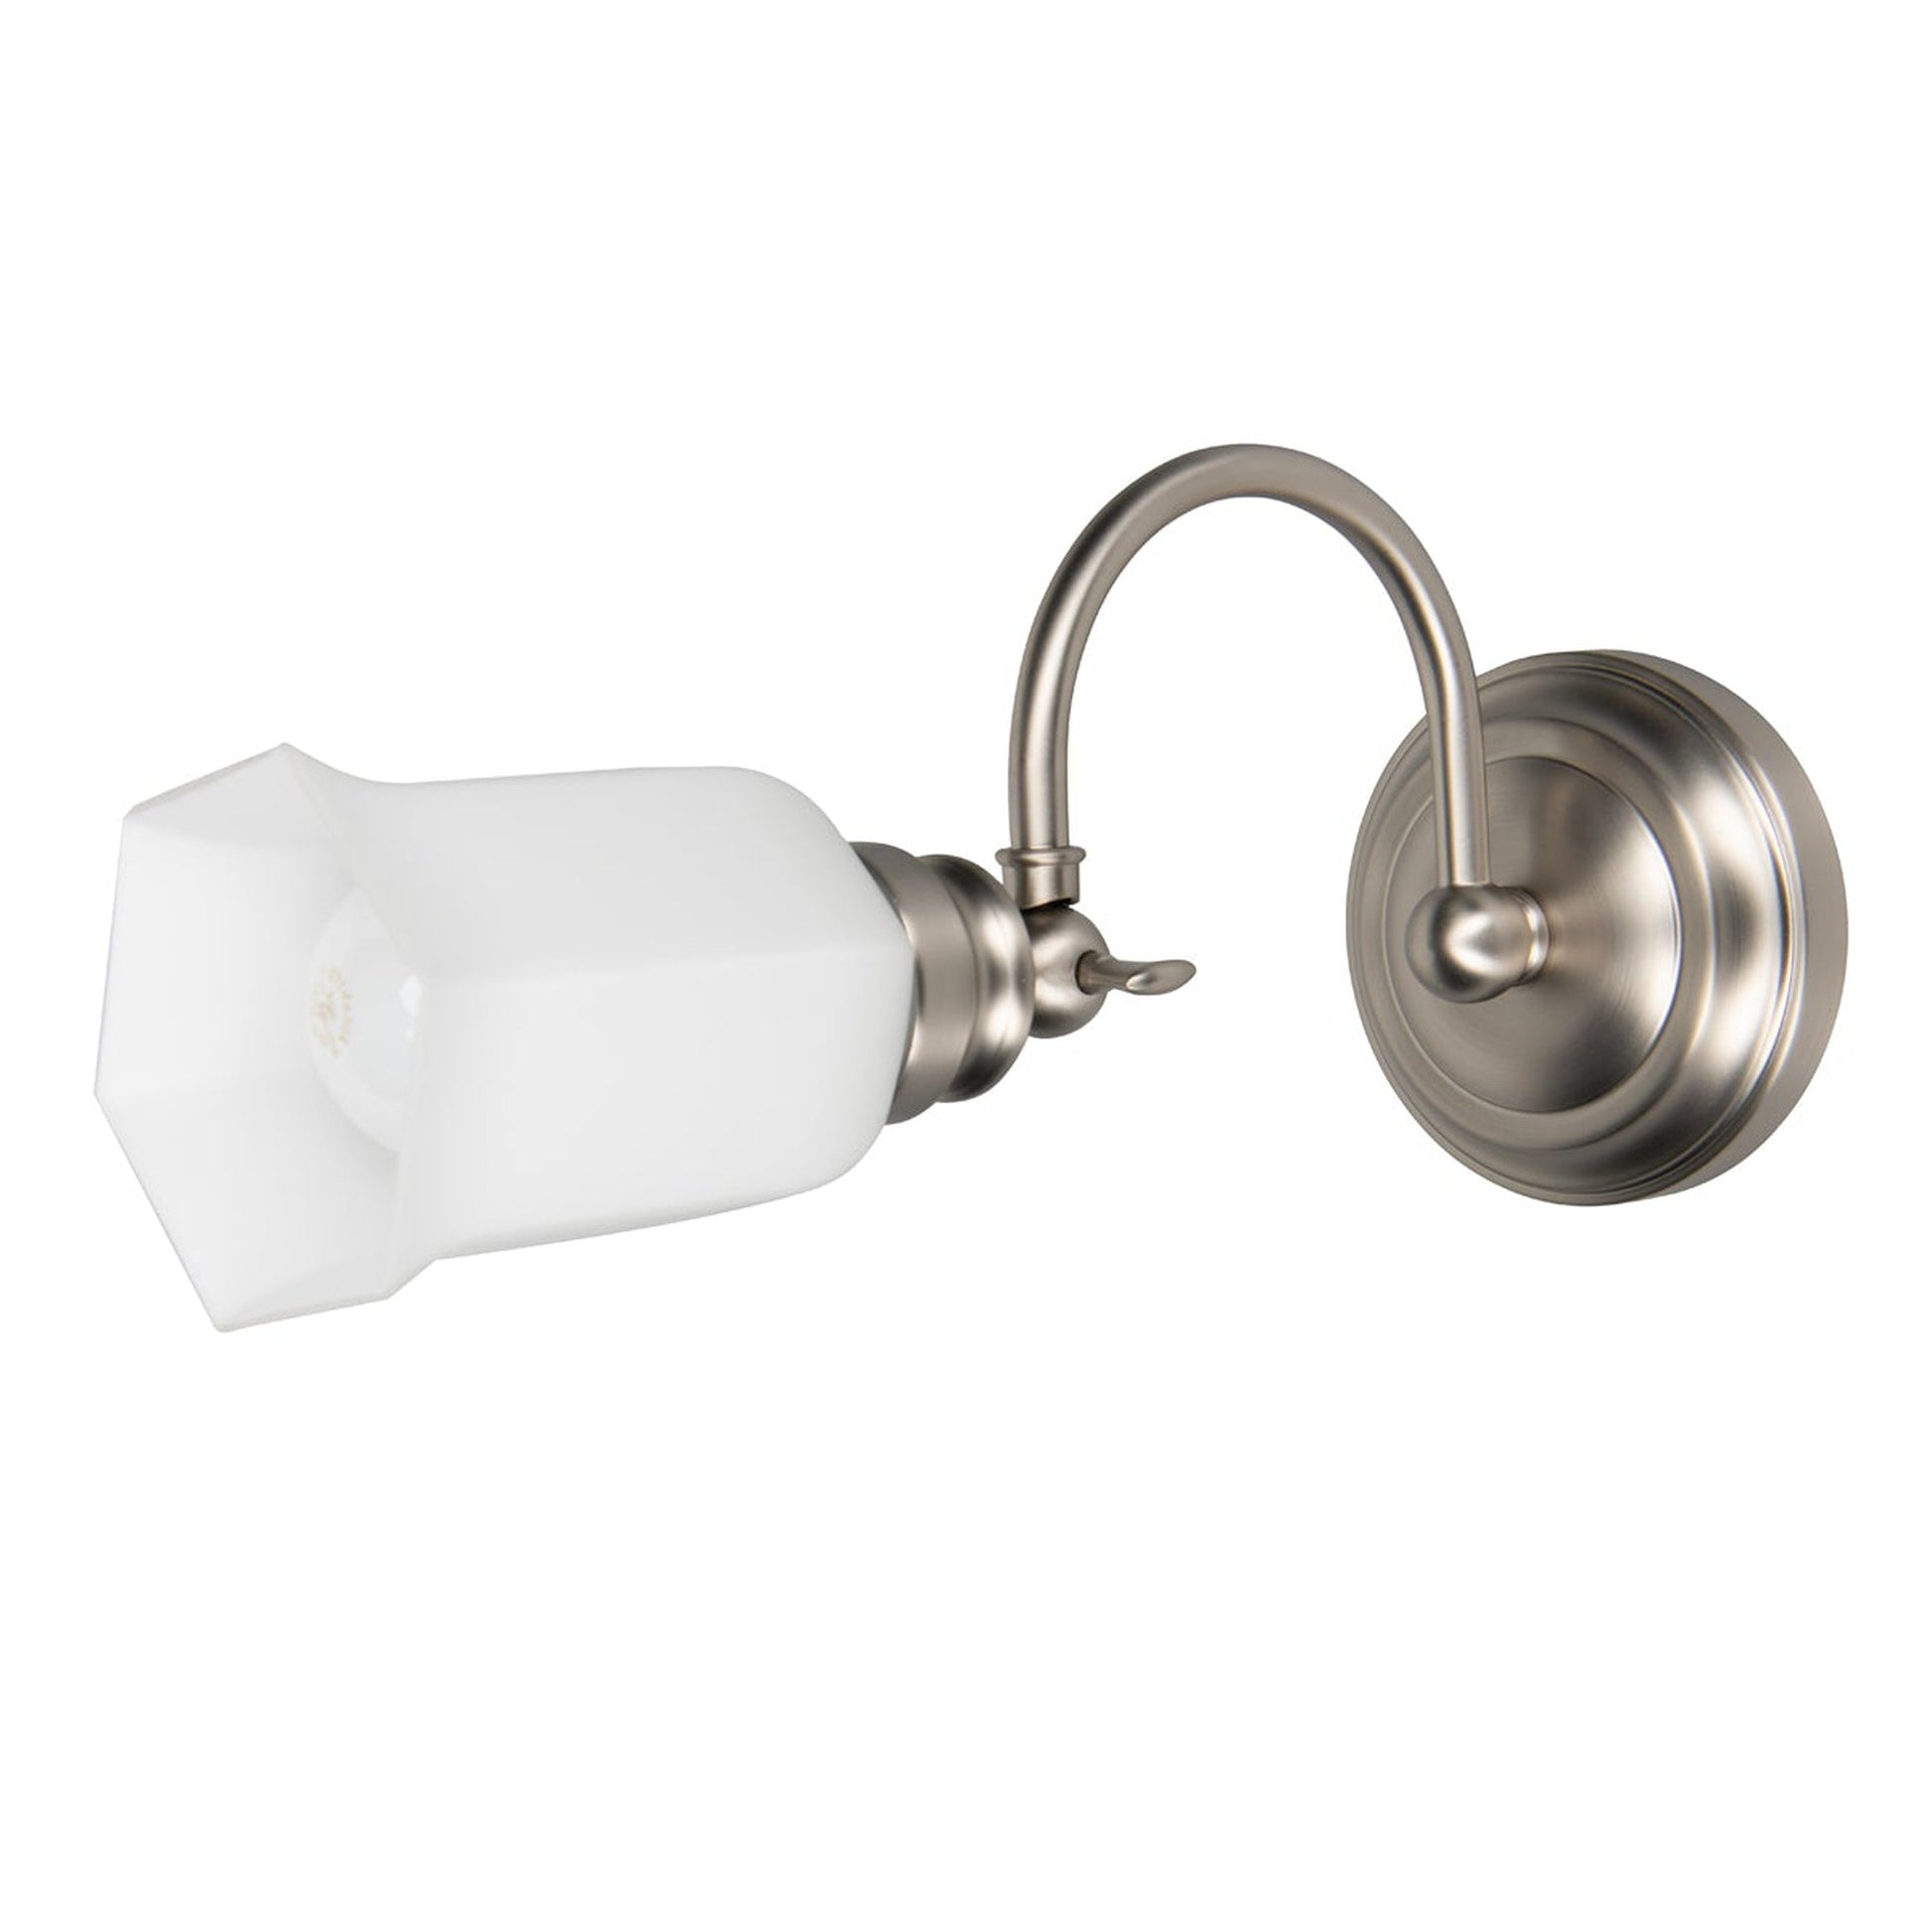 Norwell Lighting Emily 12" x 5" 1-Light Brushed Nickel Vanity Sconce With Hexagonal Opal Glass Diffuser